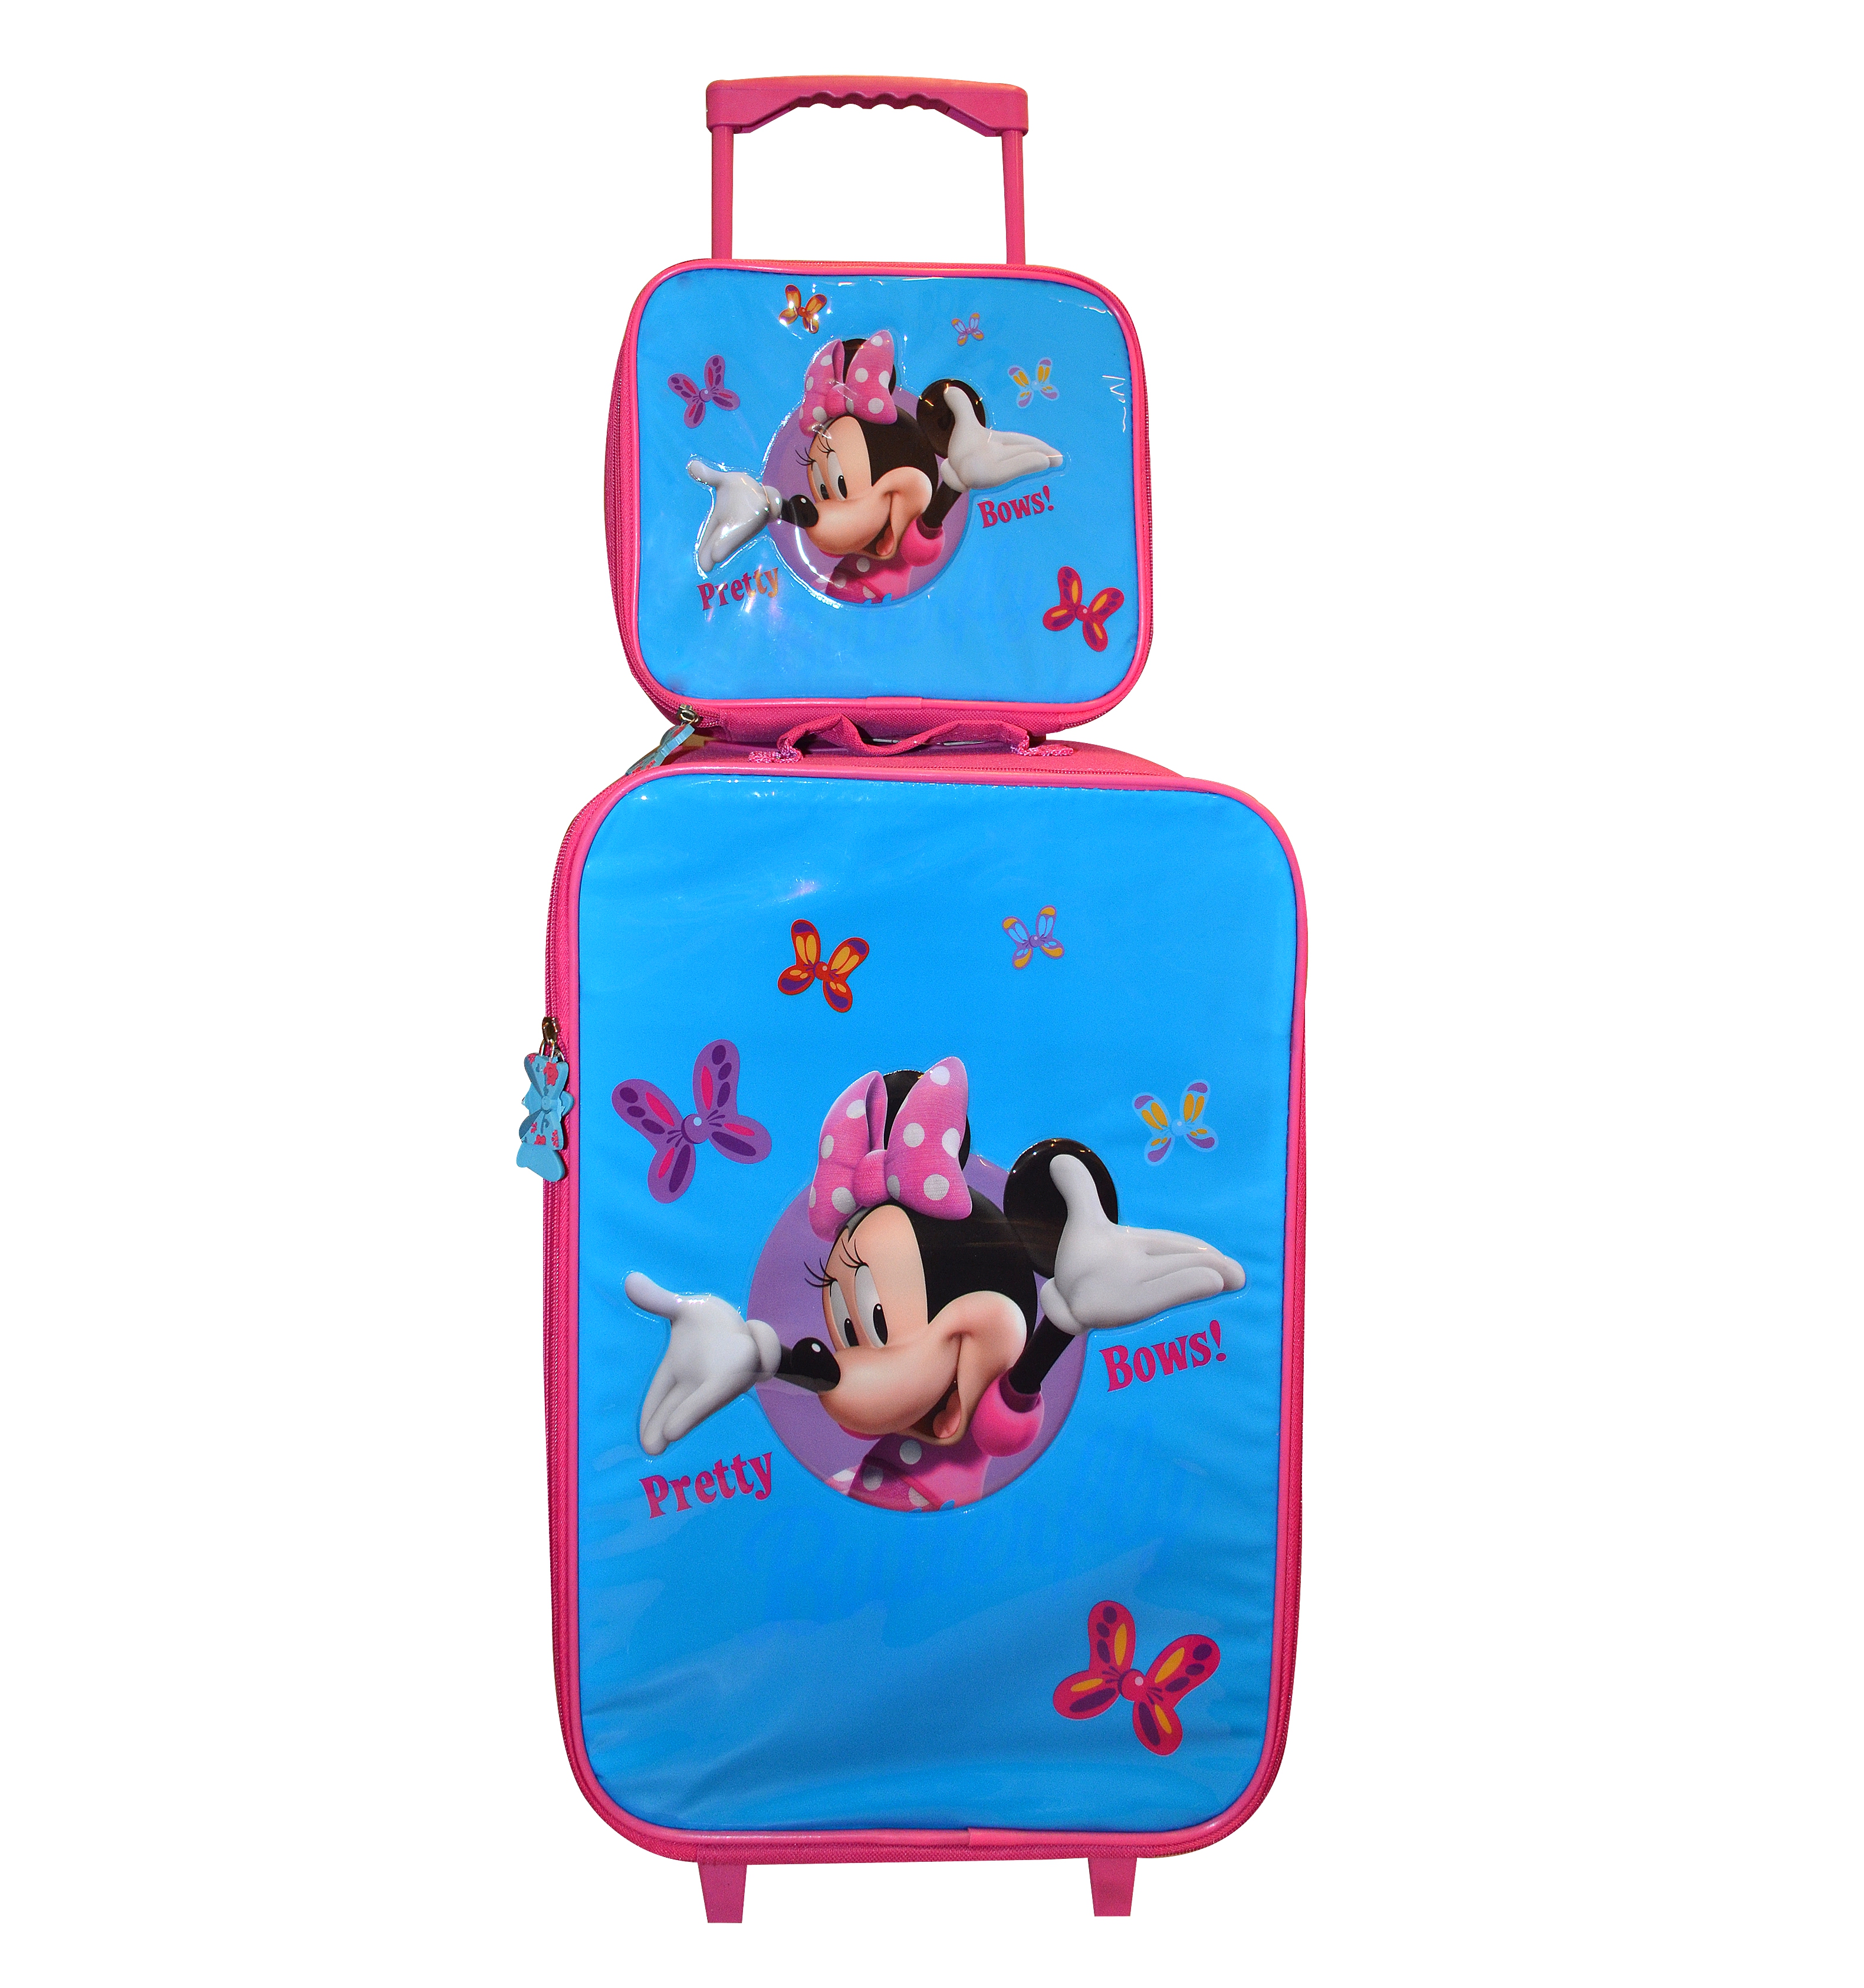 Disney Minnie Mouse 'Pretty Bows' 2 Piece Suitcase with Lunch Bag Luggage Set